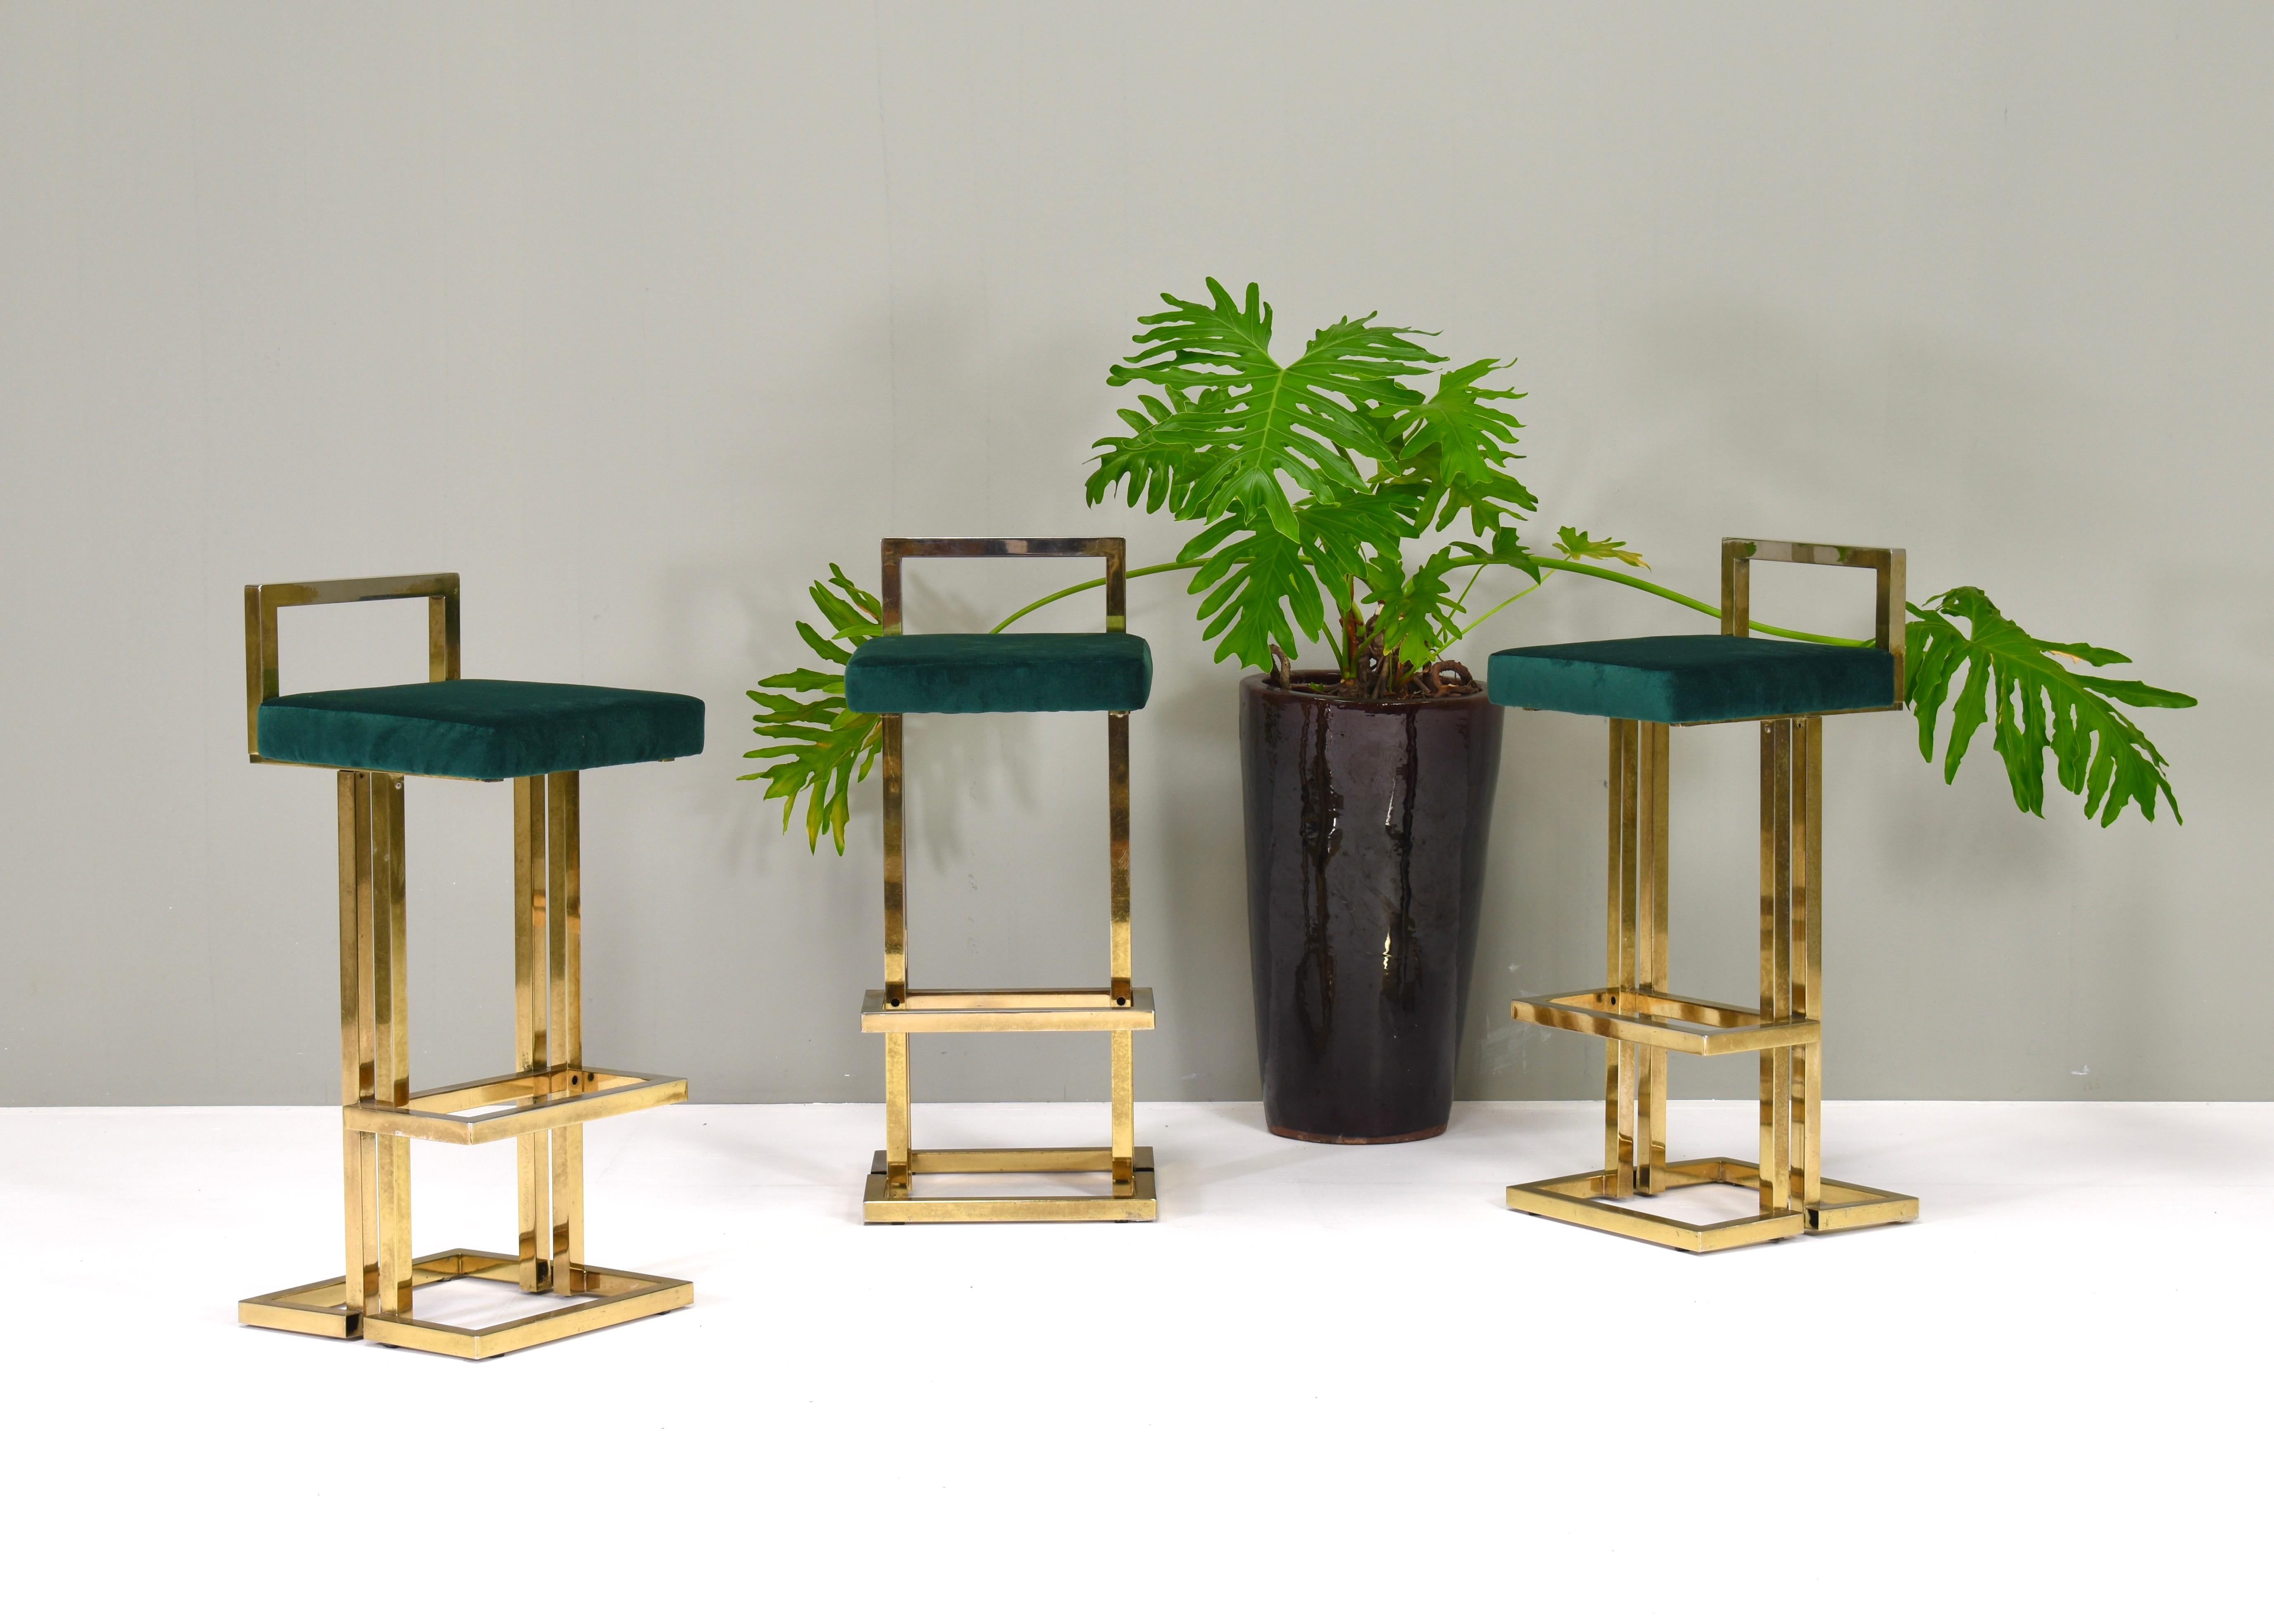 Set of three Hollywood Regency bar stools in brass and green velvet by Maison Jansen.
The seats have been reupholstered with new foam and green velvet fabric. The brass has a worn and faded patina. The structure still remains strong with repairs or